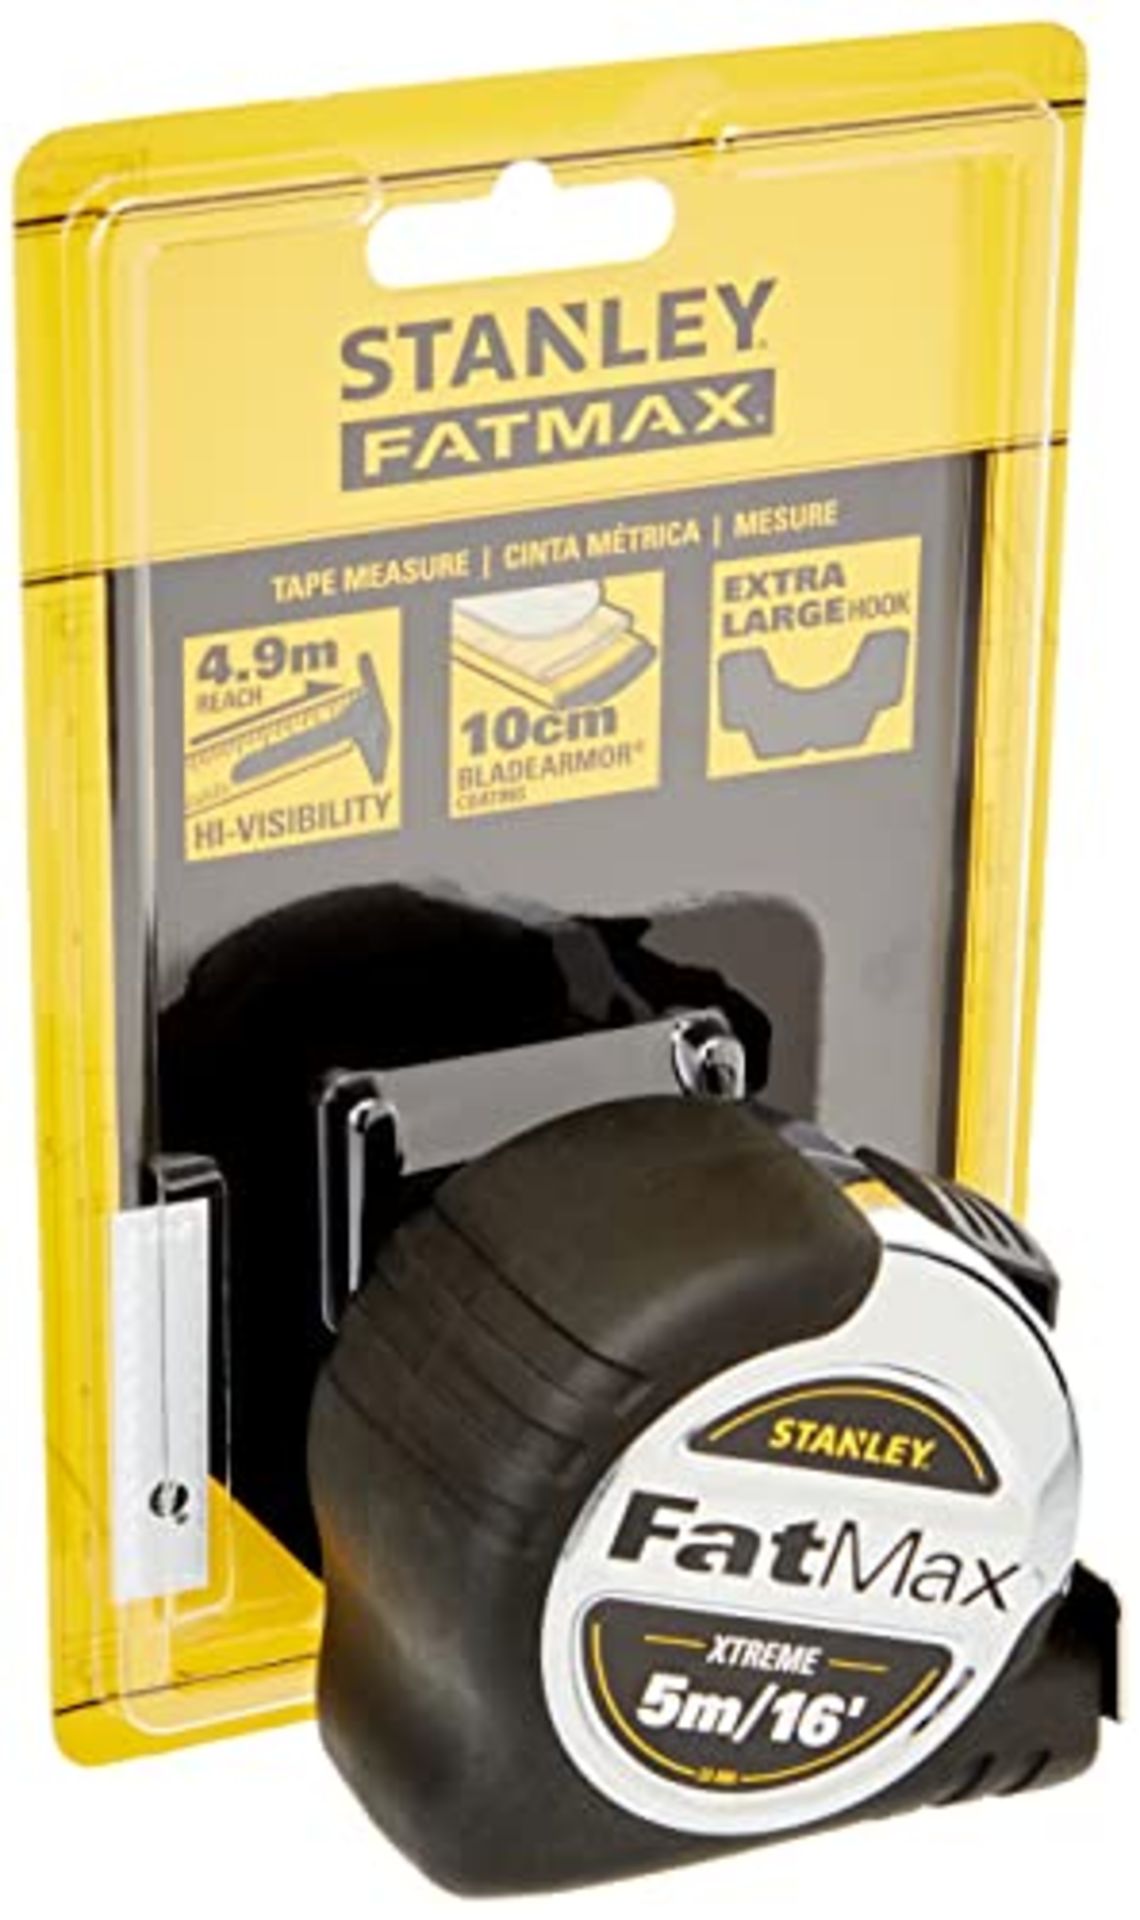 STANLEY FatMax Xtreme 5m/16ft Tape Measure, 5-33-886